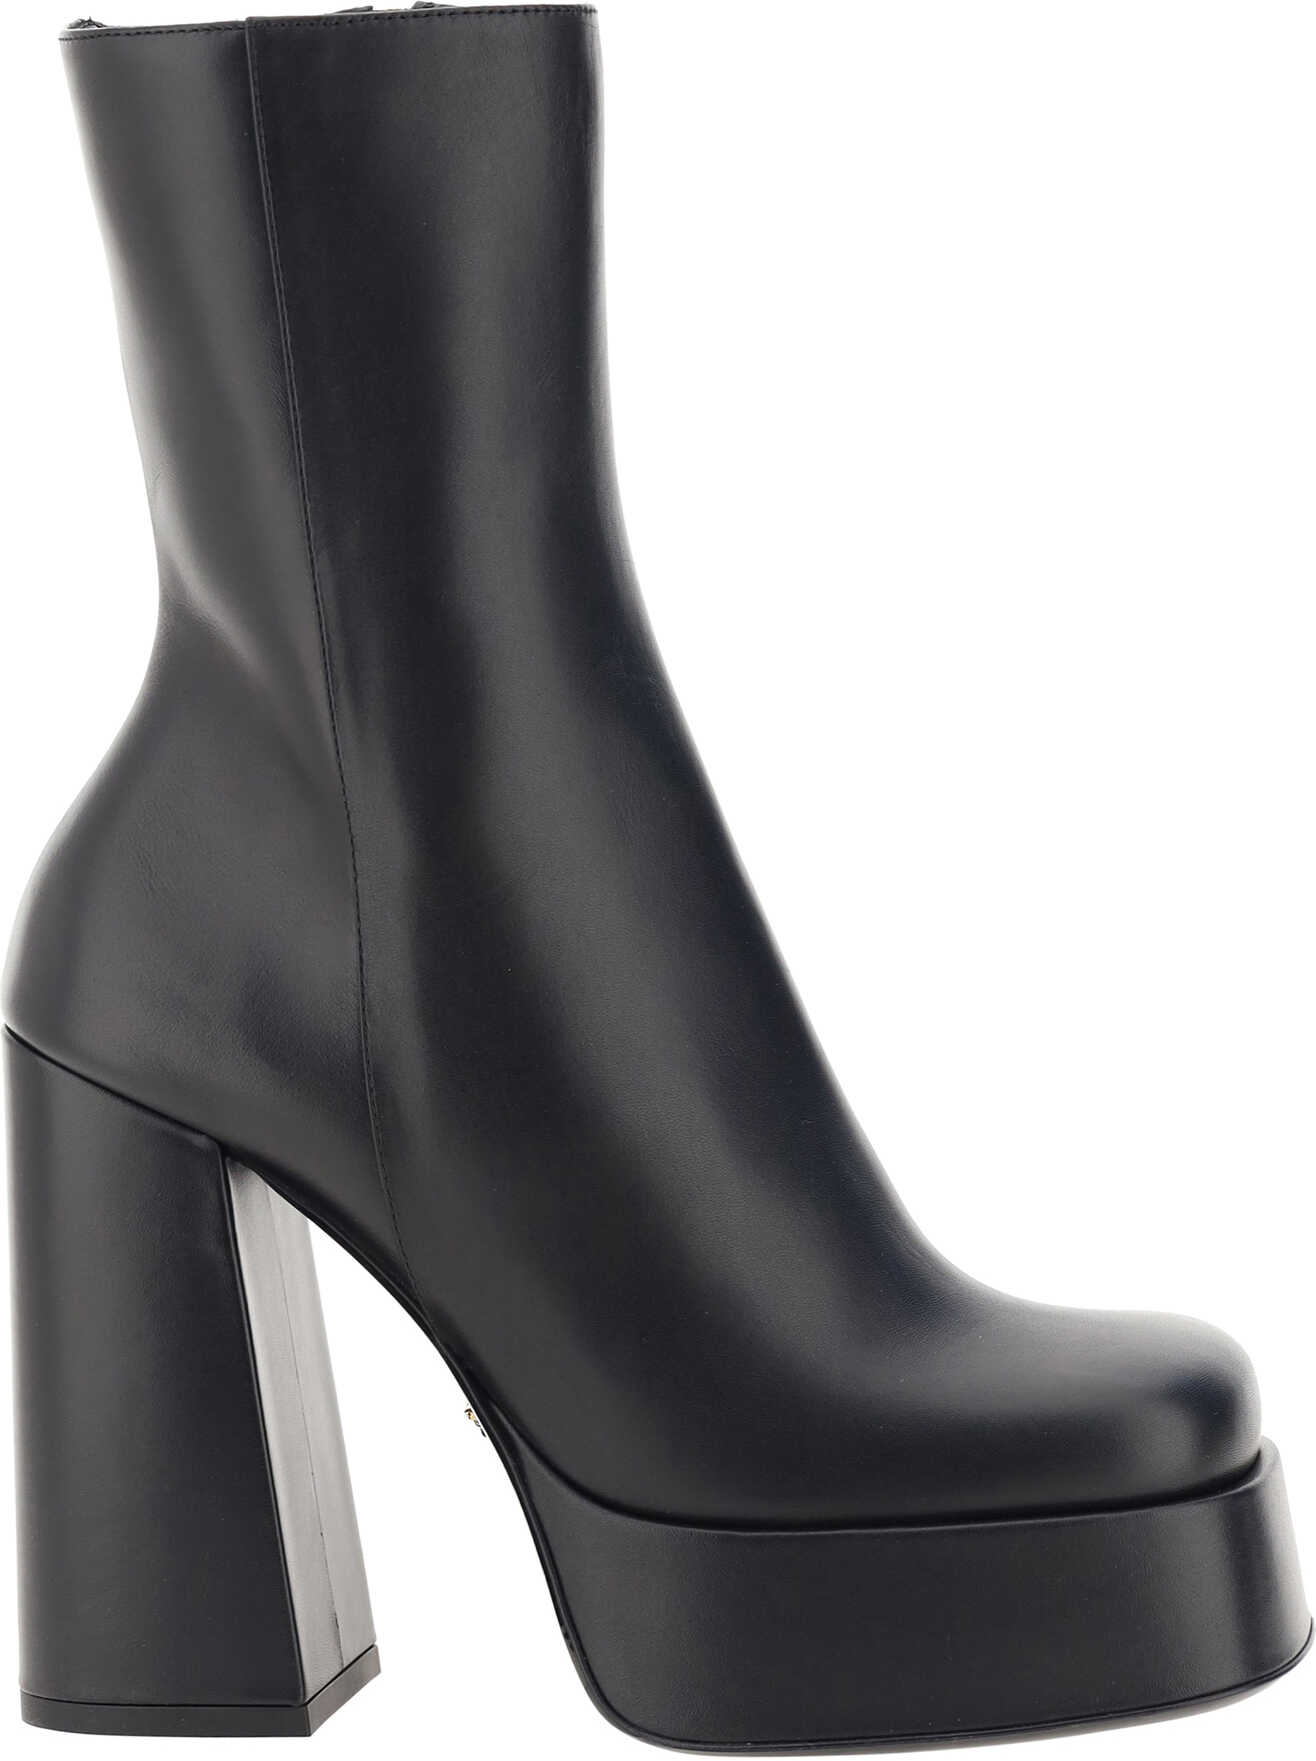 Versace Ankle Boots NERO+ORO VERSACE image4